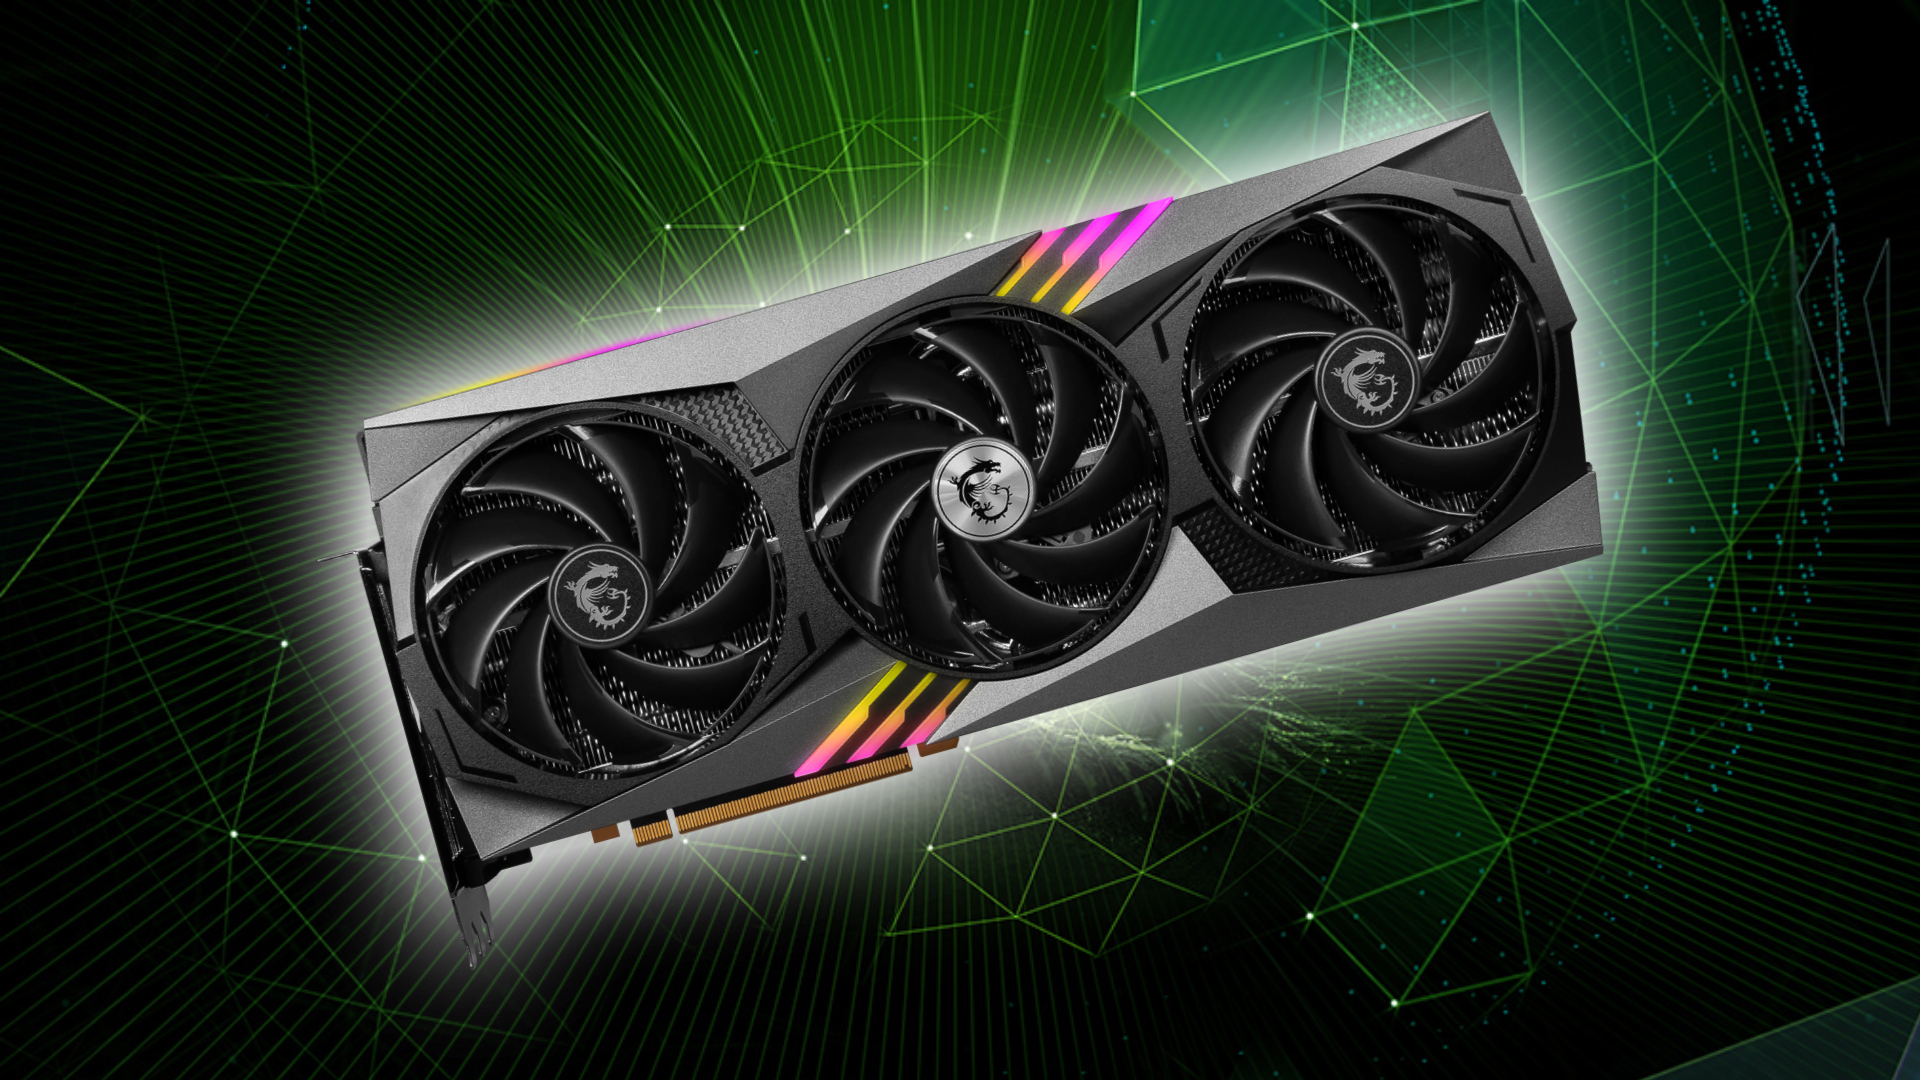 Where to buy RTX 4080 Super GPUs - listings are live!